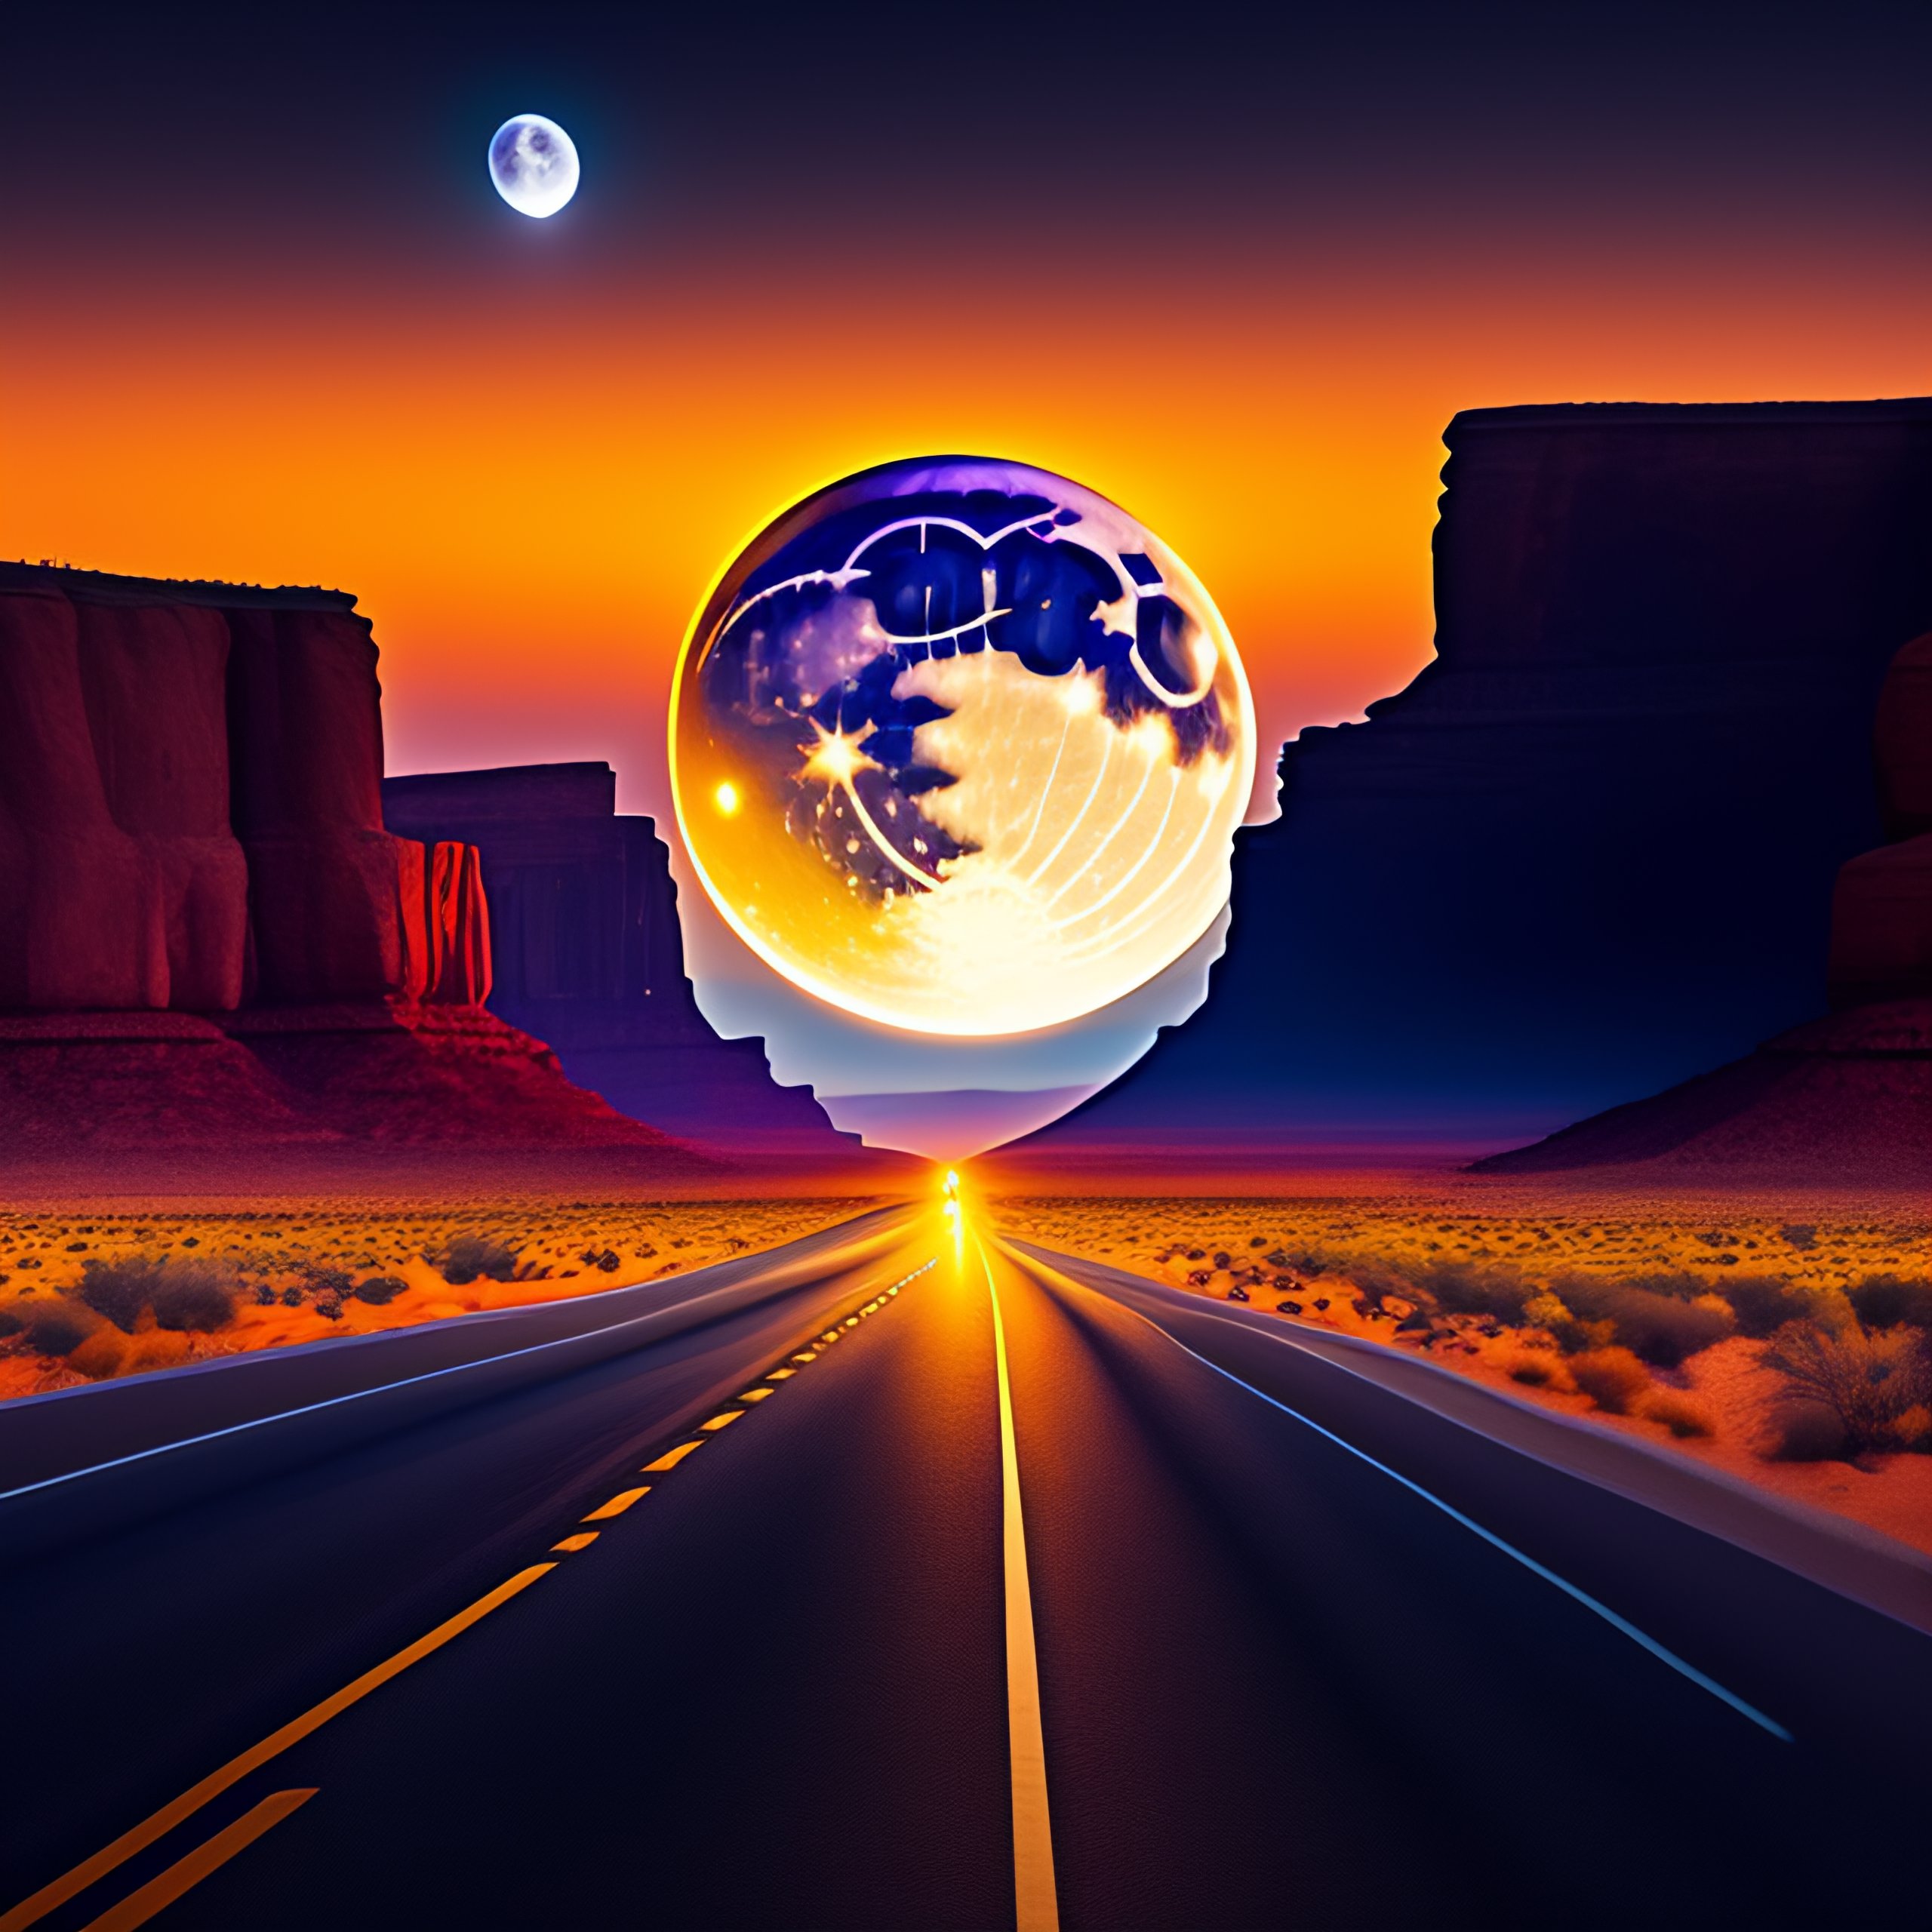 Lexica - A roadrunner from looney tunes running with spinning legs by the  road in grand canyon at night. huge moon in the sky, concept art,  cyberpun